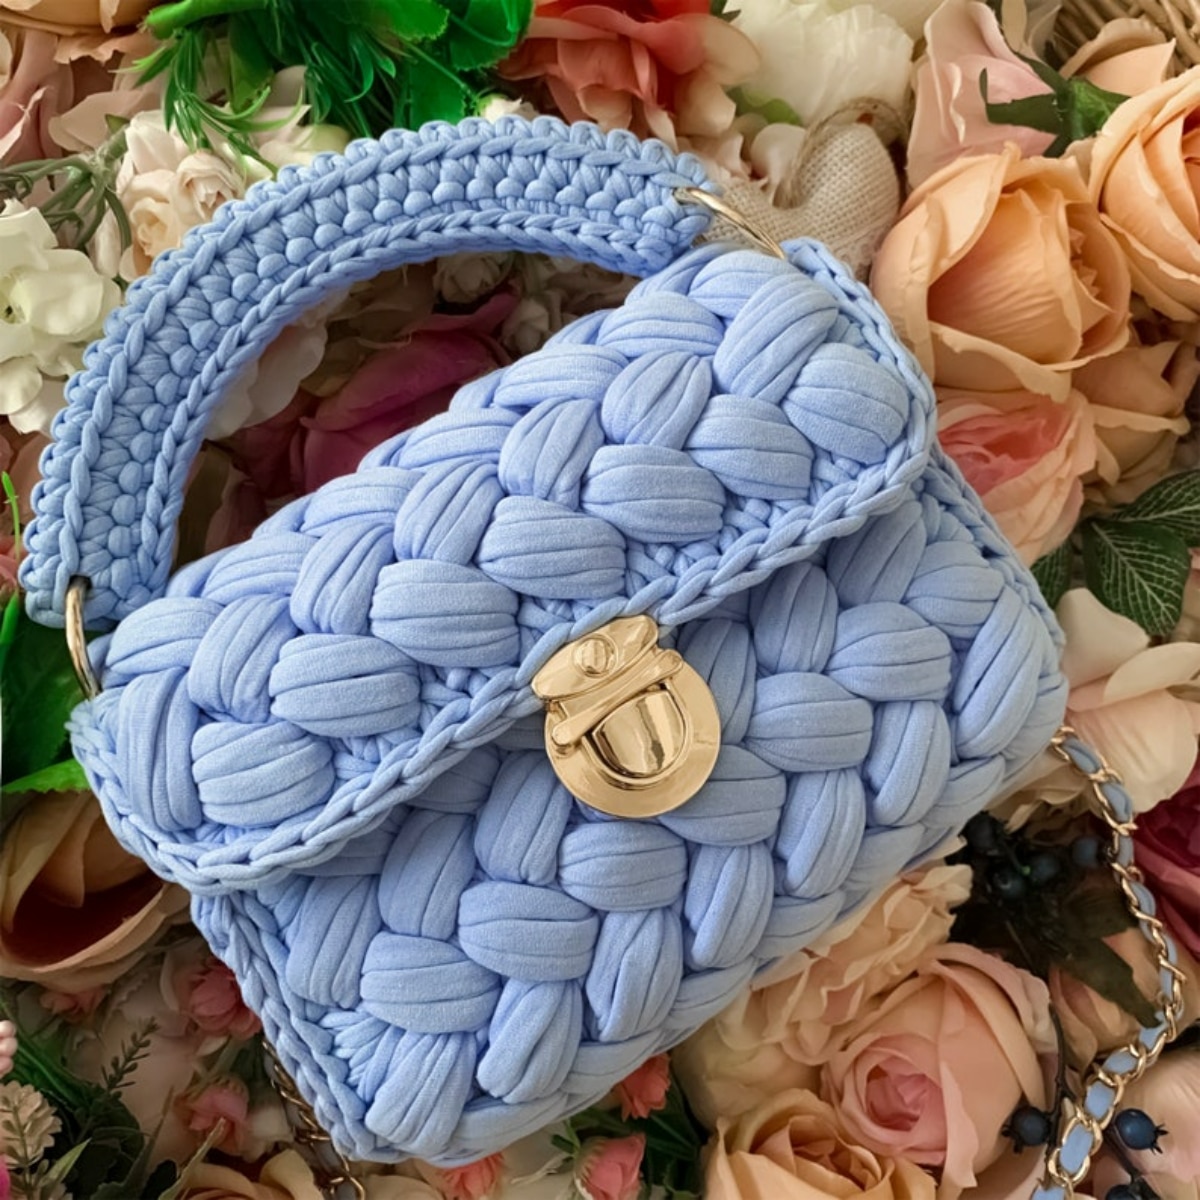 A small blue crochet handbag with a gold buckle in the center to secure it and a short thick blue braided handle on top.